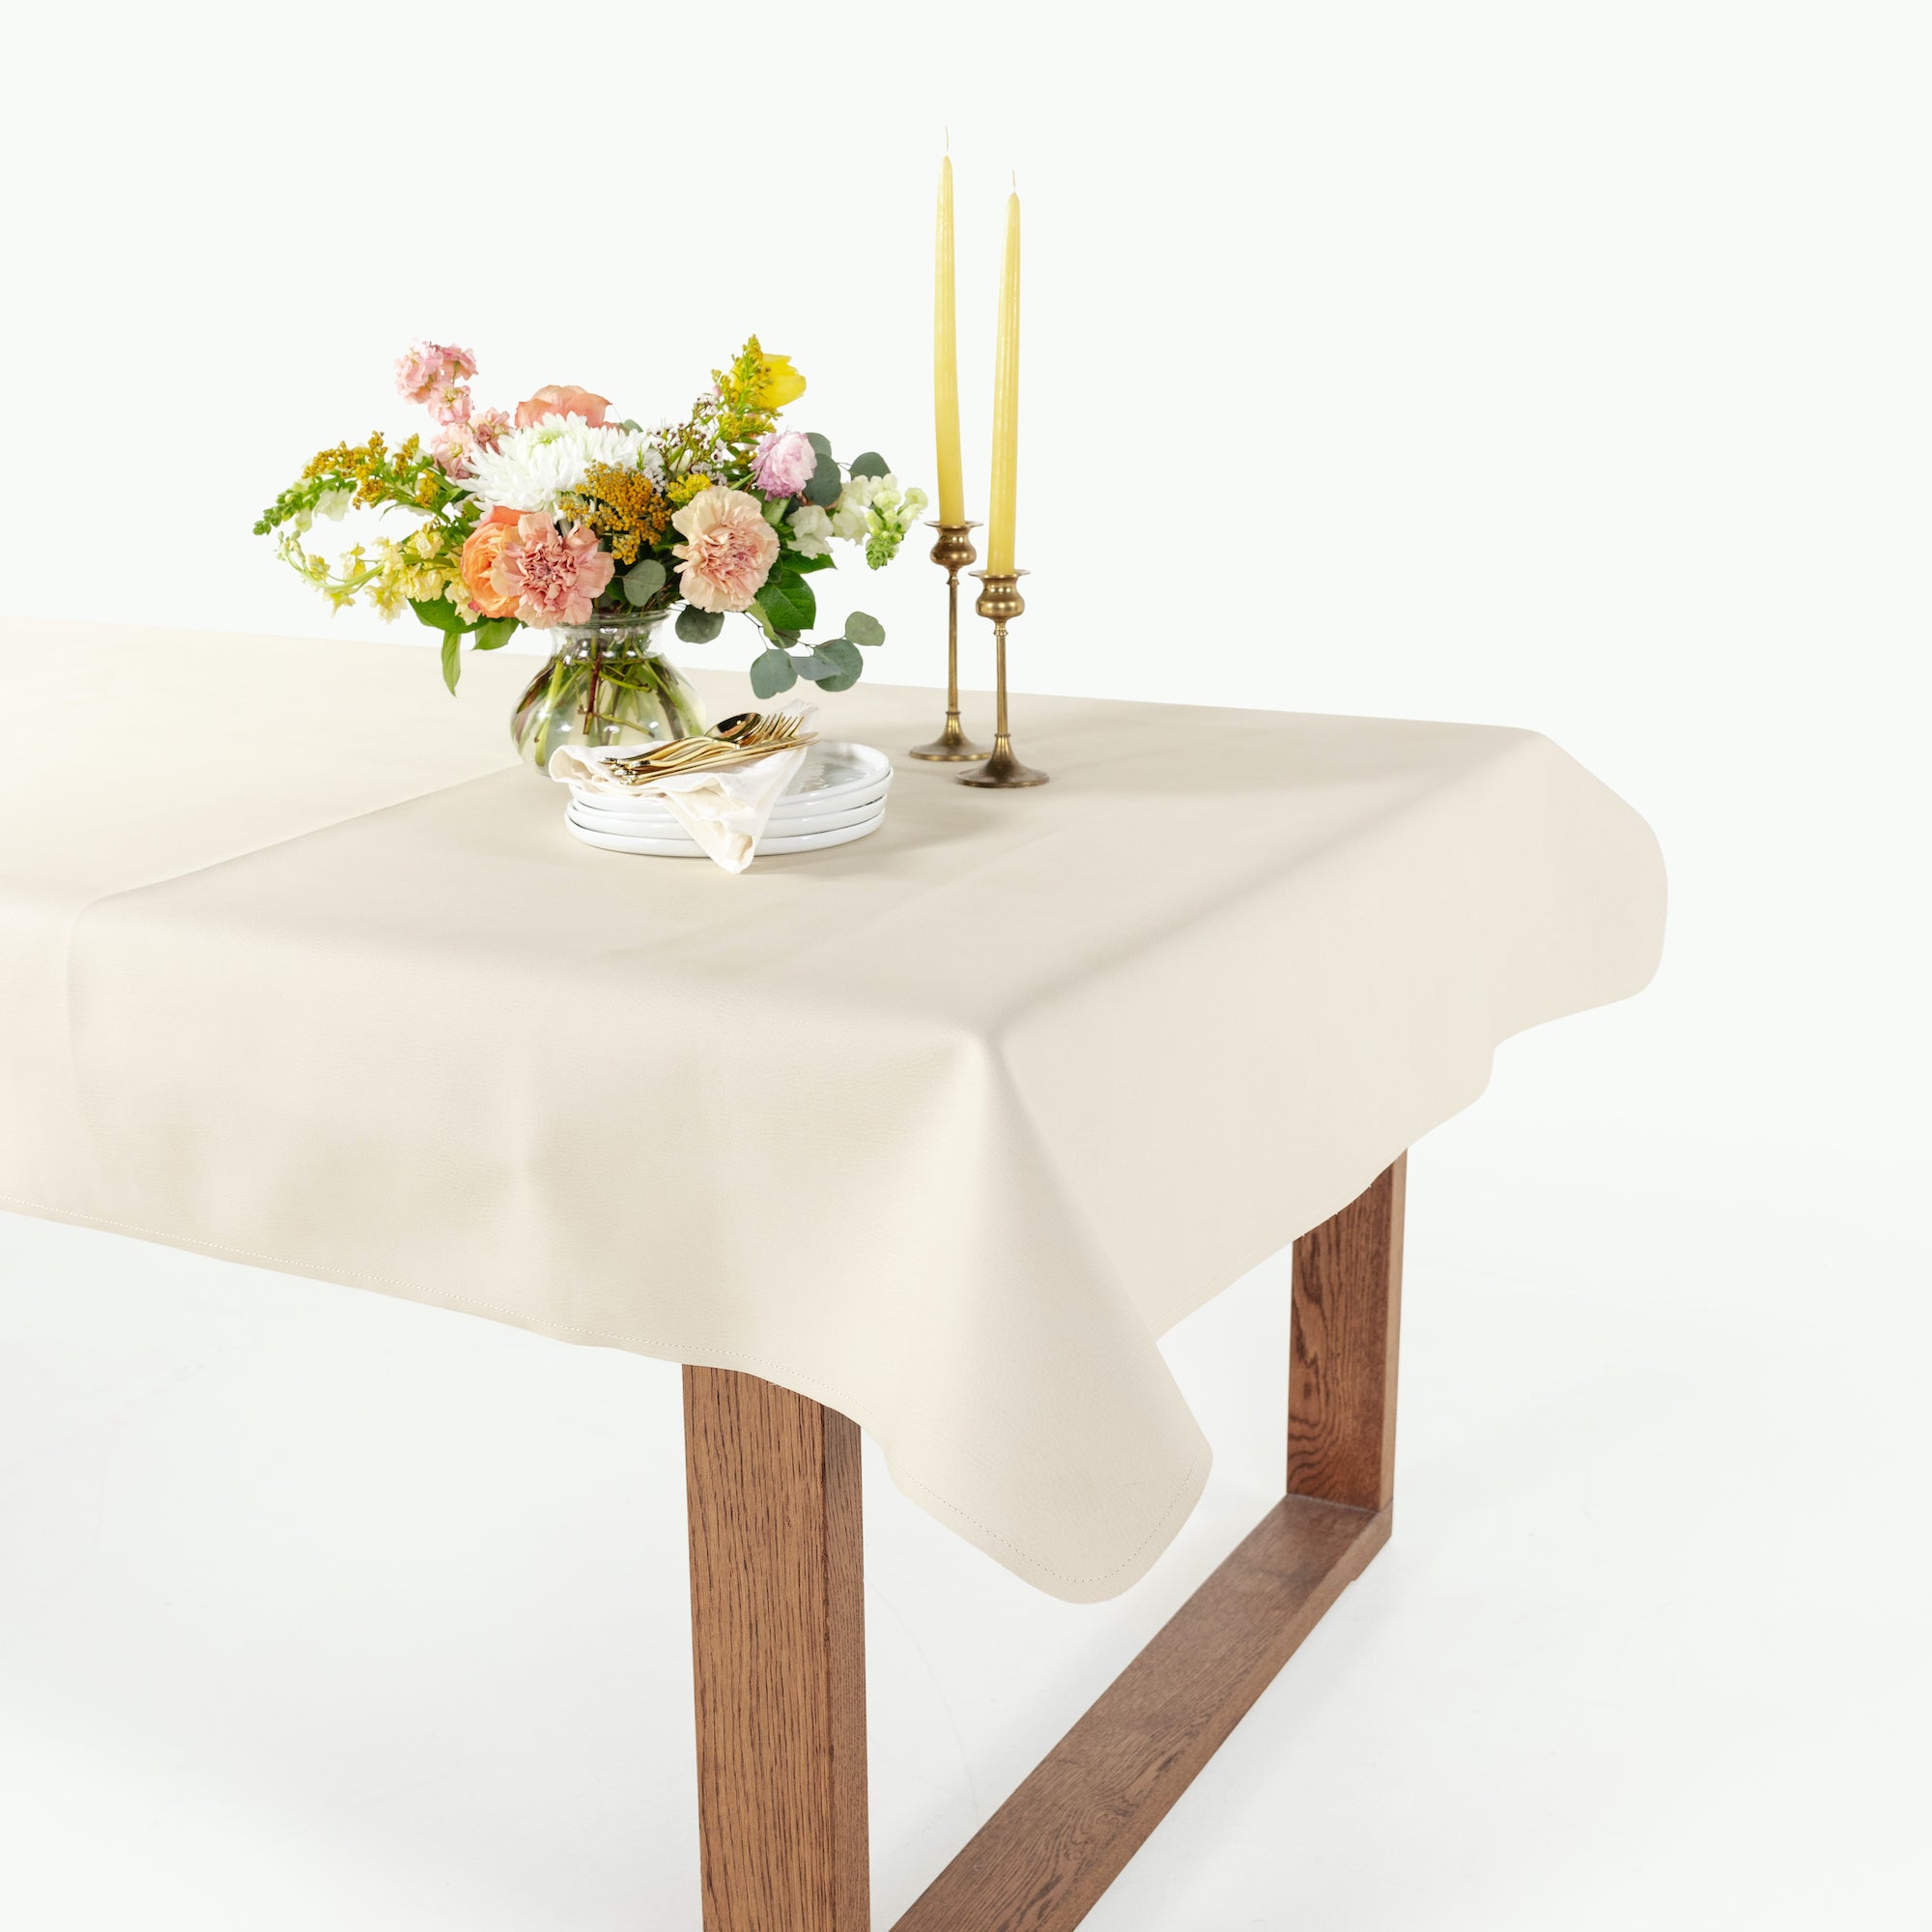 Camel • Ivory / 6 Foot@tablecloth with flowers and candles